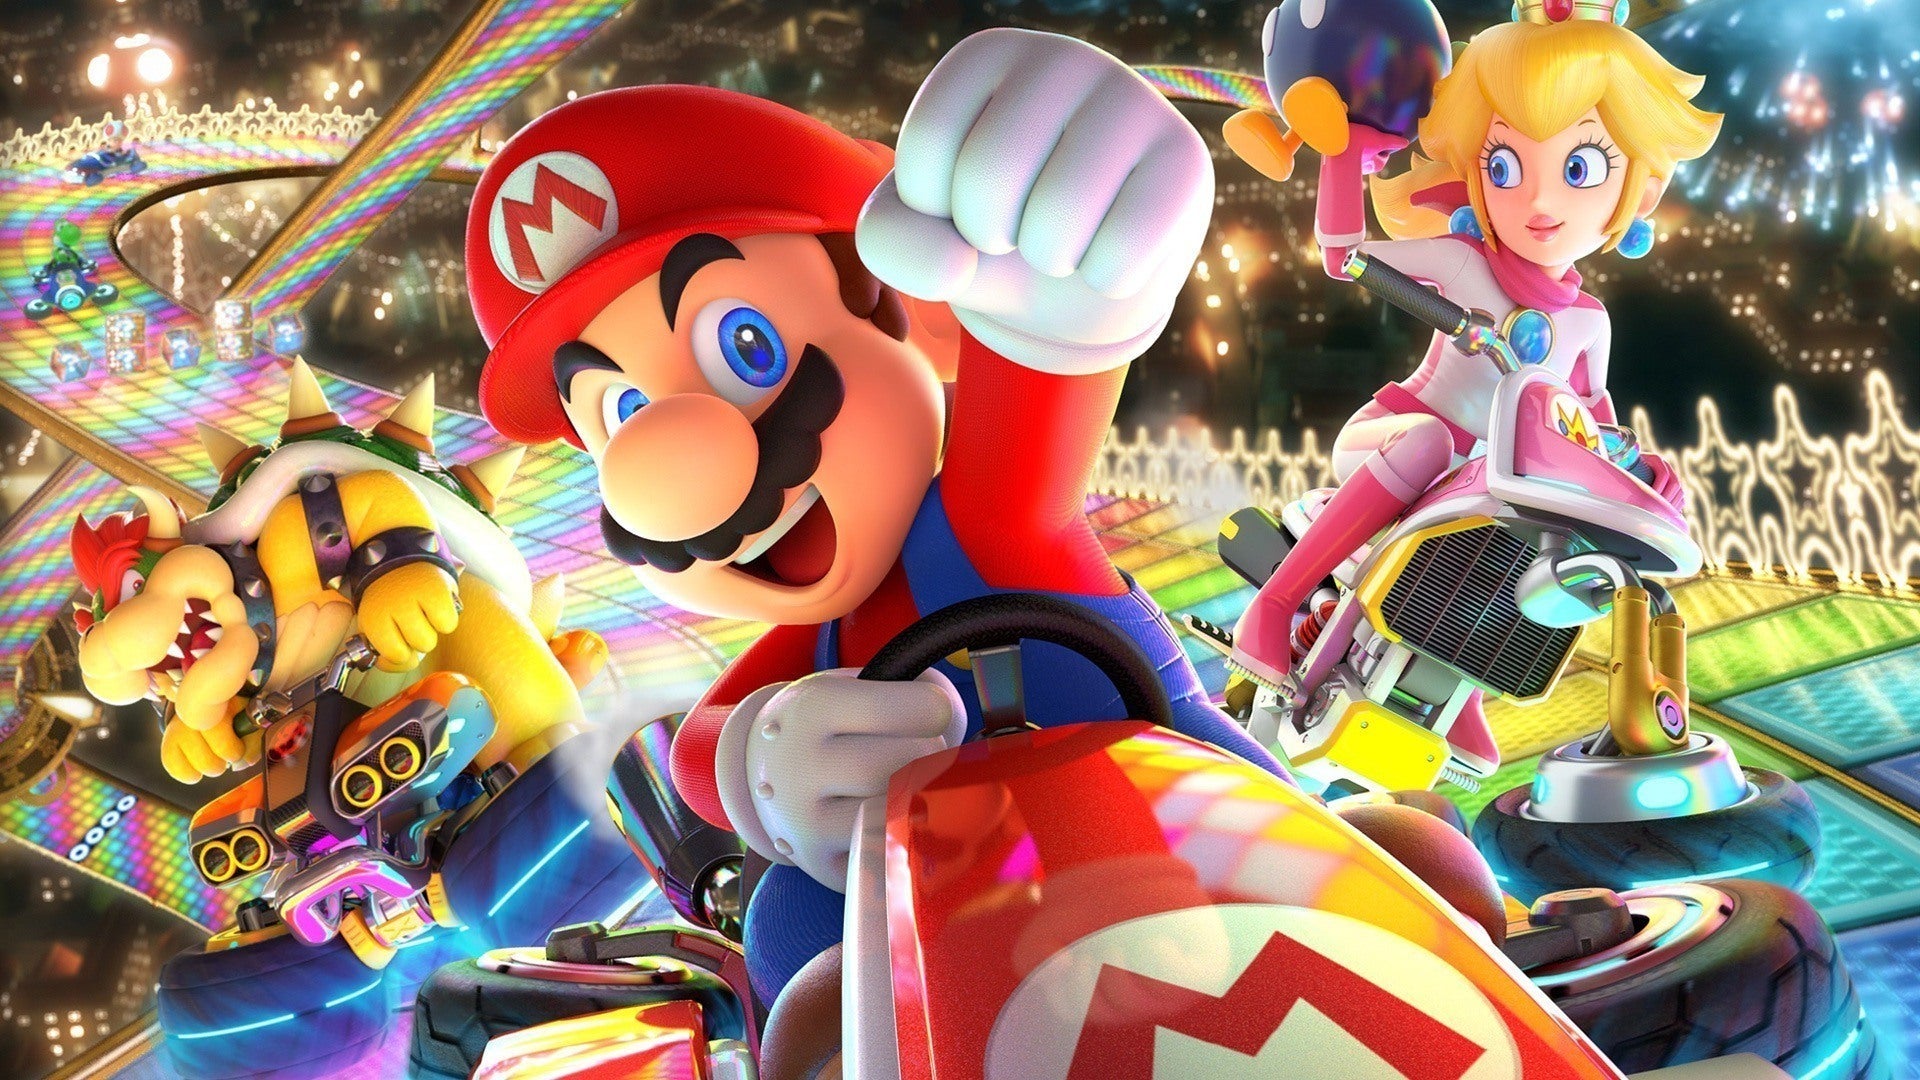 Nintendo disables Splatoon and Mario Kart 8 online features on Wii U due to security vulnerability